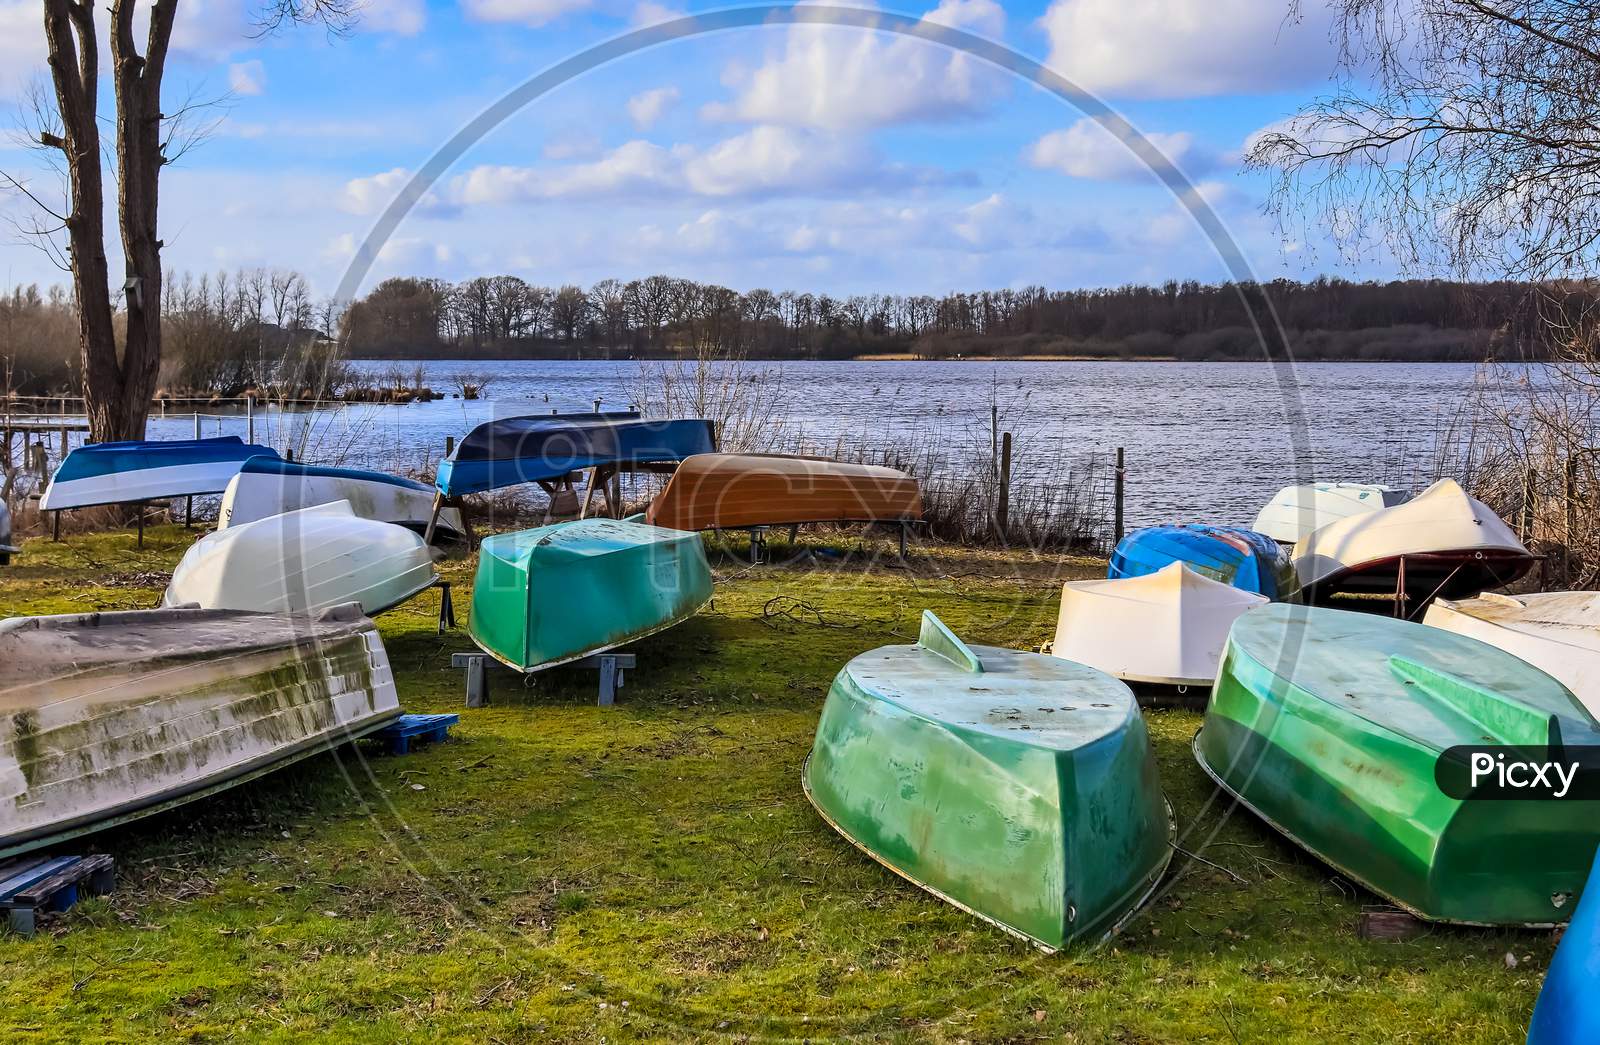 Multiple rowboats lying on a lawn at a beautiful lake on a sunny day